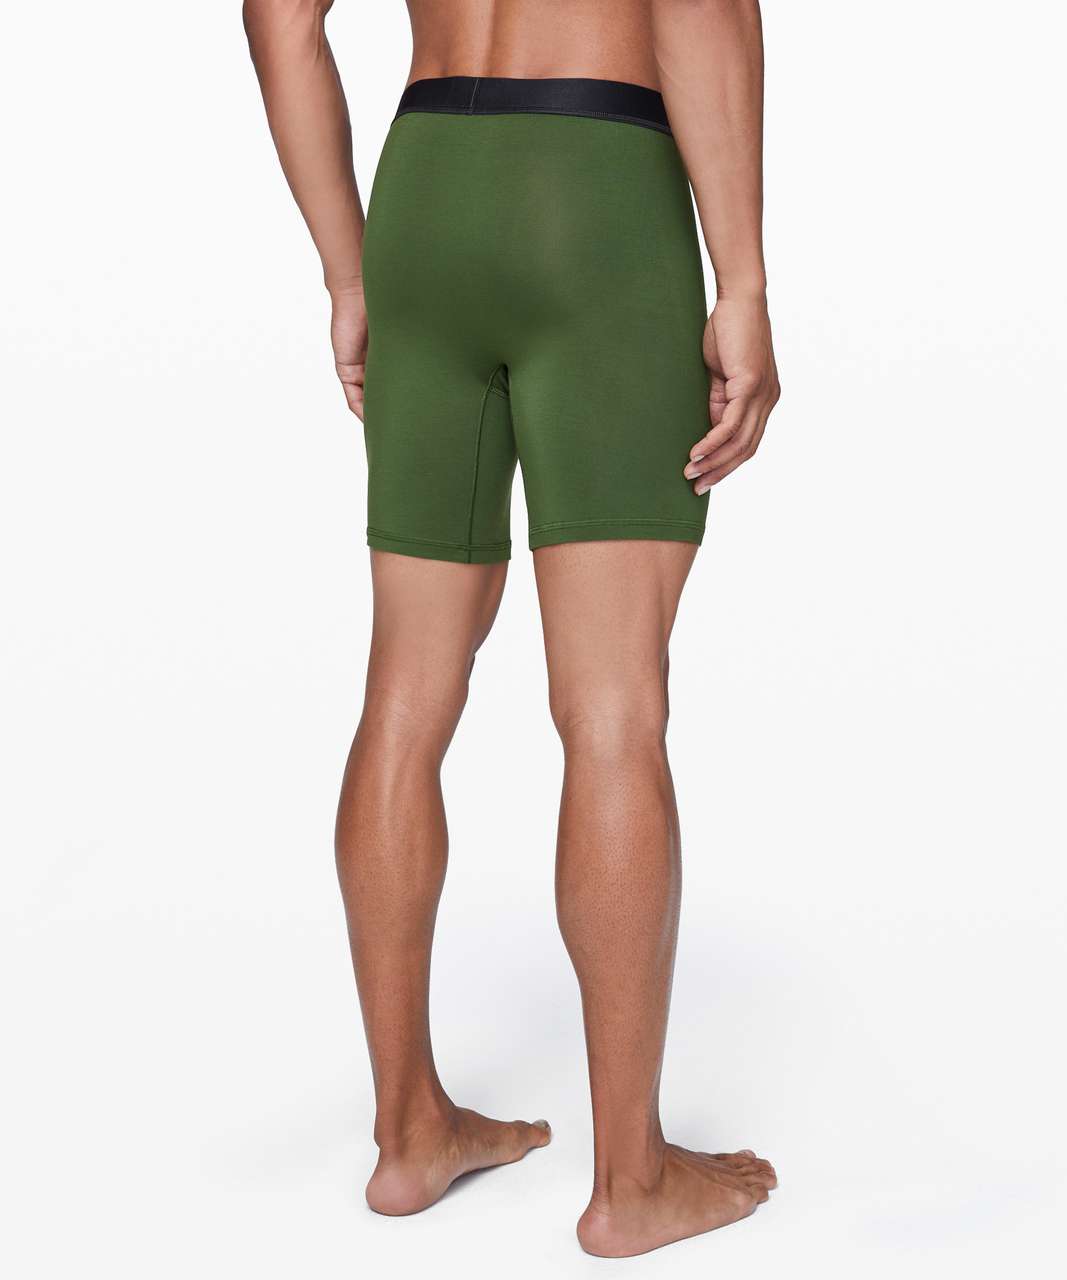 Lululemon Always In Motion Boxer *The Long One 7" - Loden Green